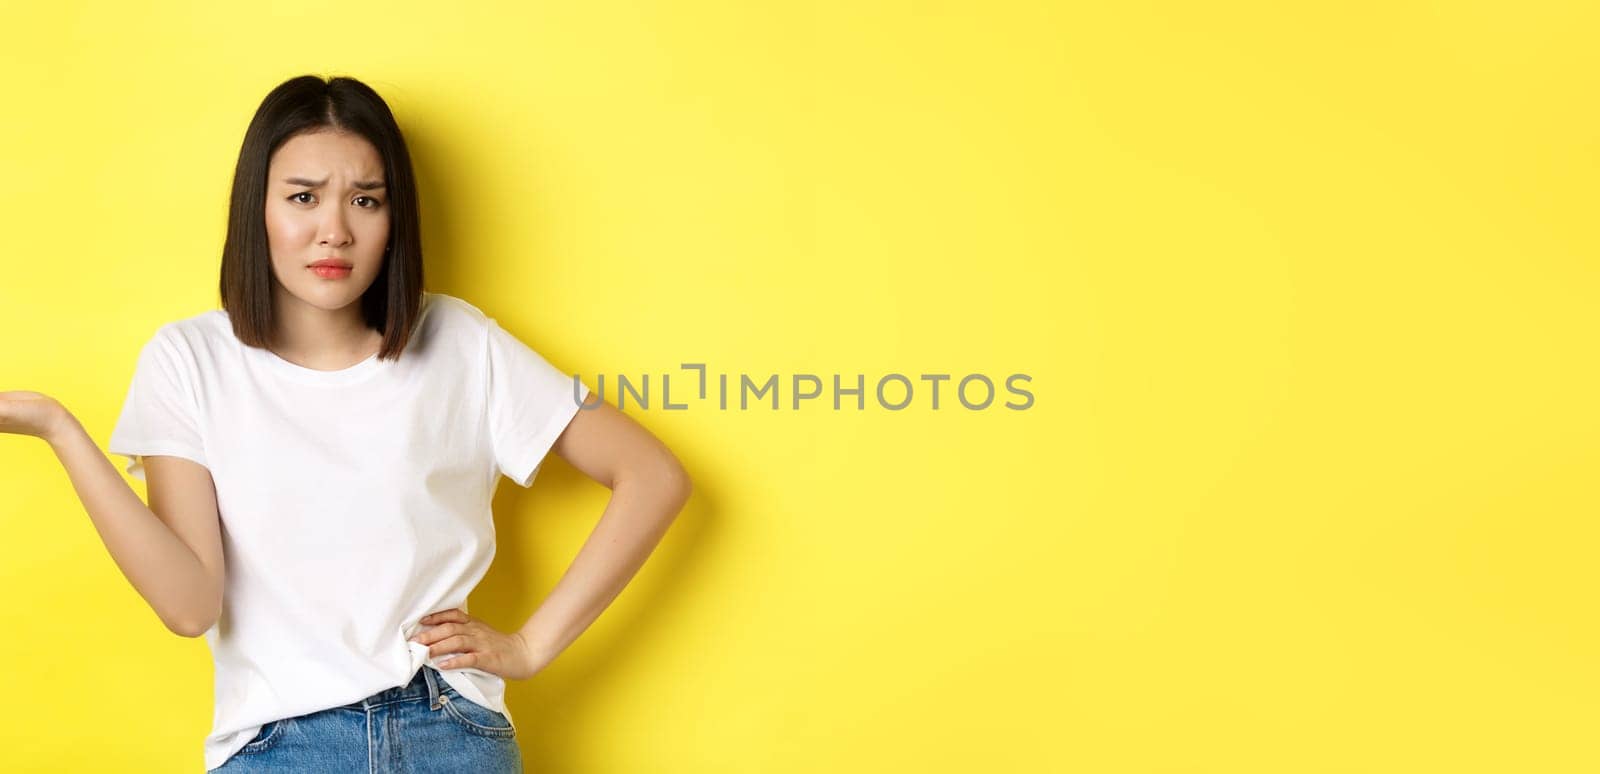 Disappointed asian woman asking so what, raise hand up and staring skeptical at camera, standing over yellow background.